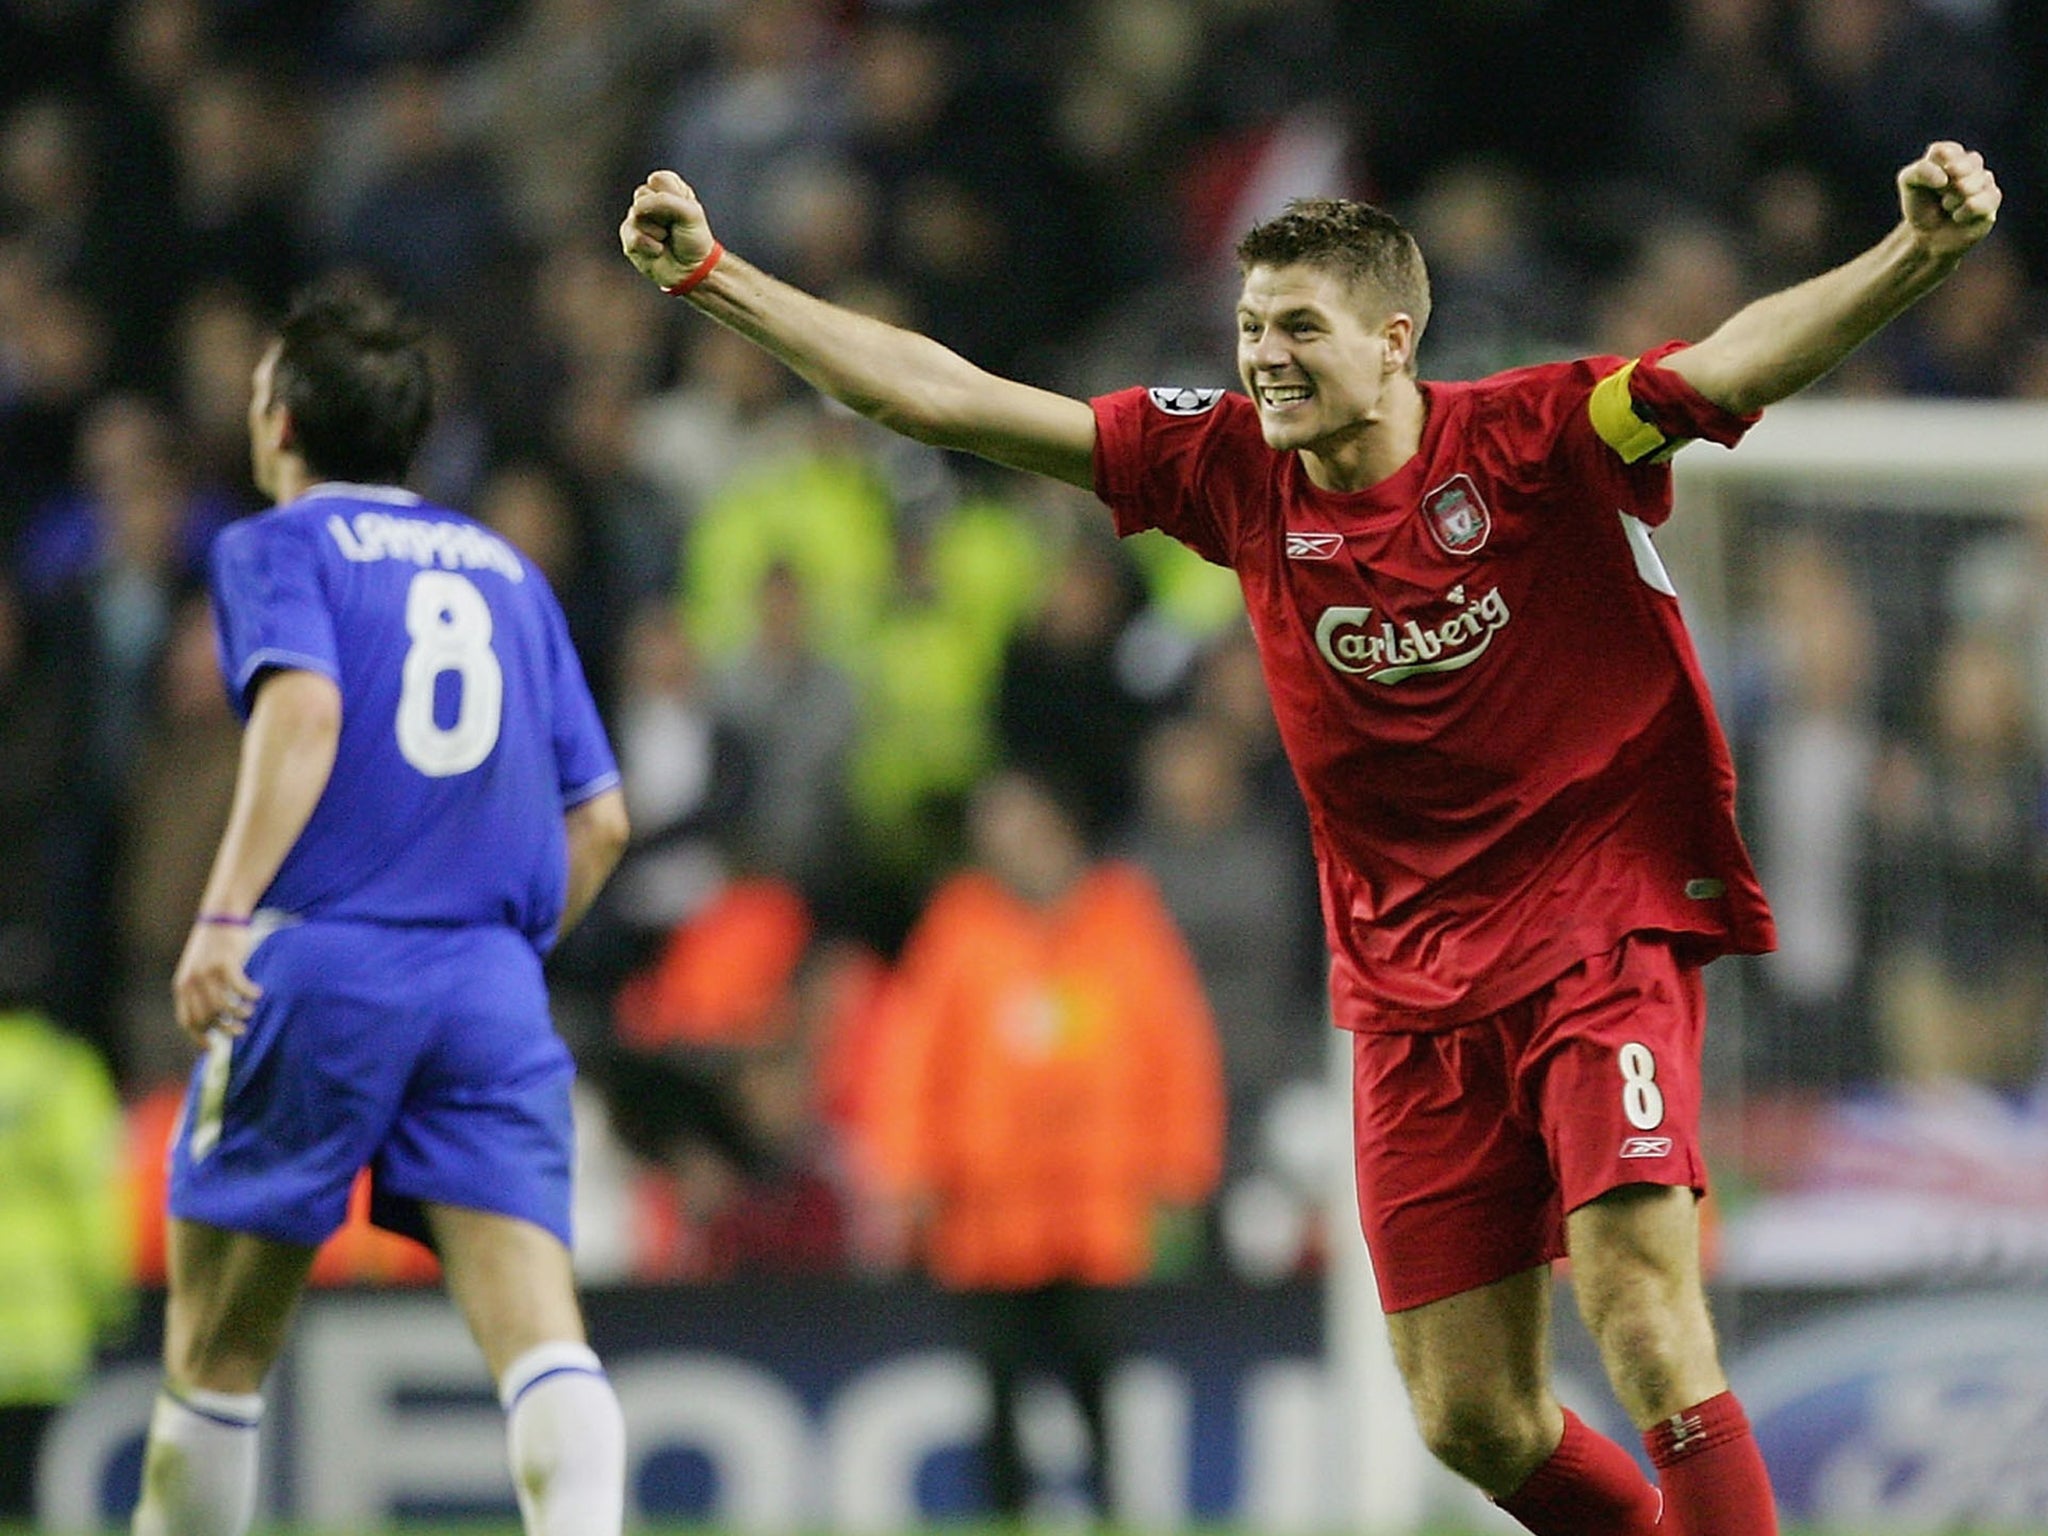 Steven Gerrard of Liverpool celebrates at the end of the UEFA Champions League semi-final second leg match between Liverpool and Chelsea